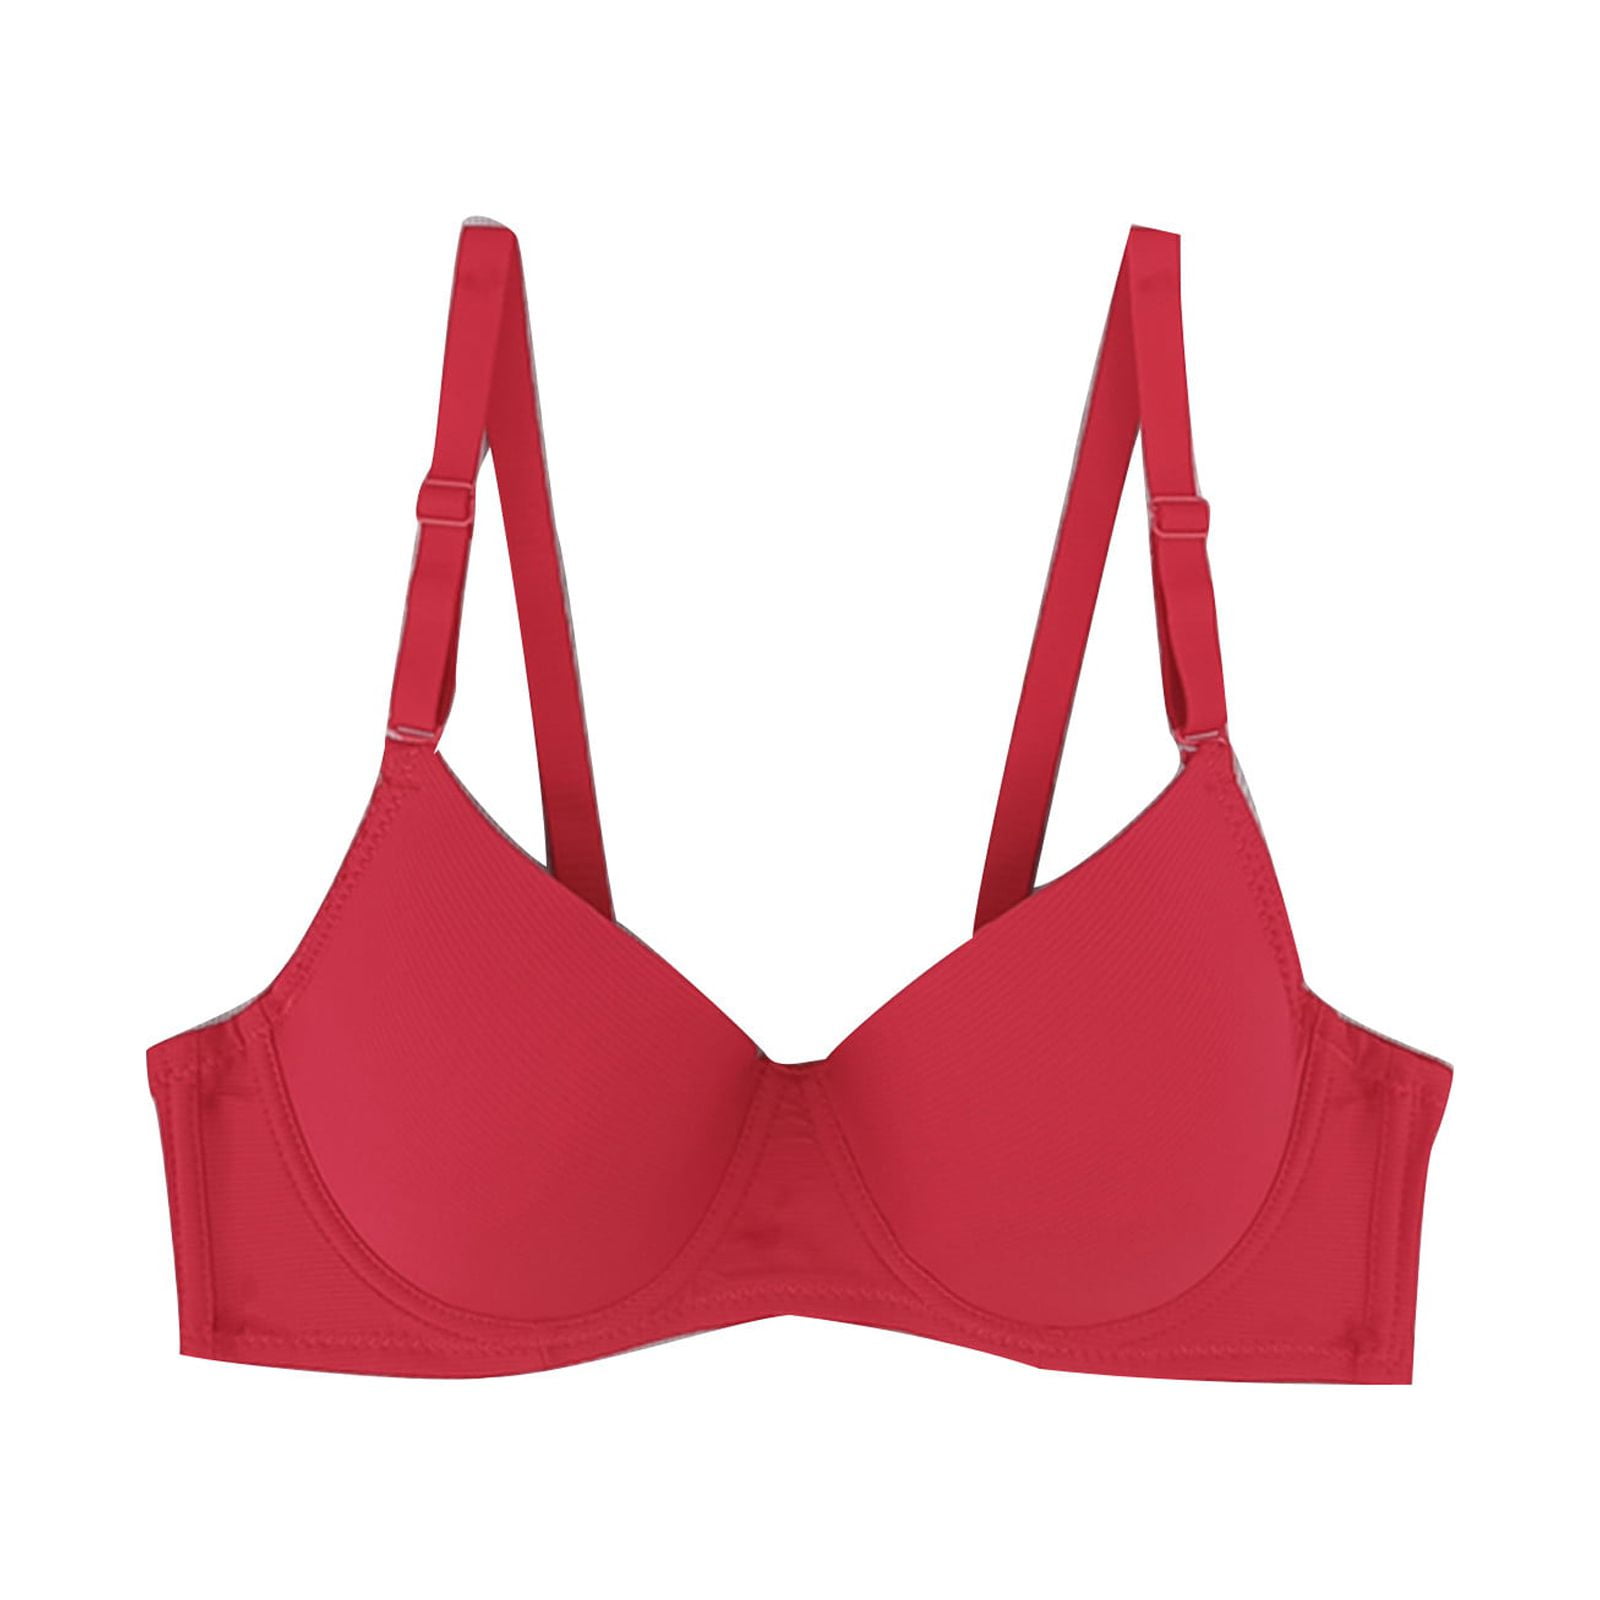 Tagold Fall Clothes for Womens Wireless Bras,Women Solid Underwear